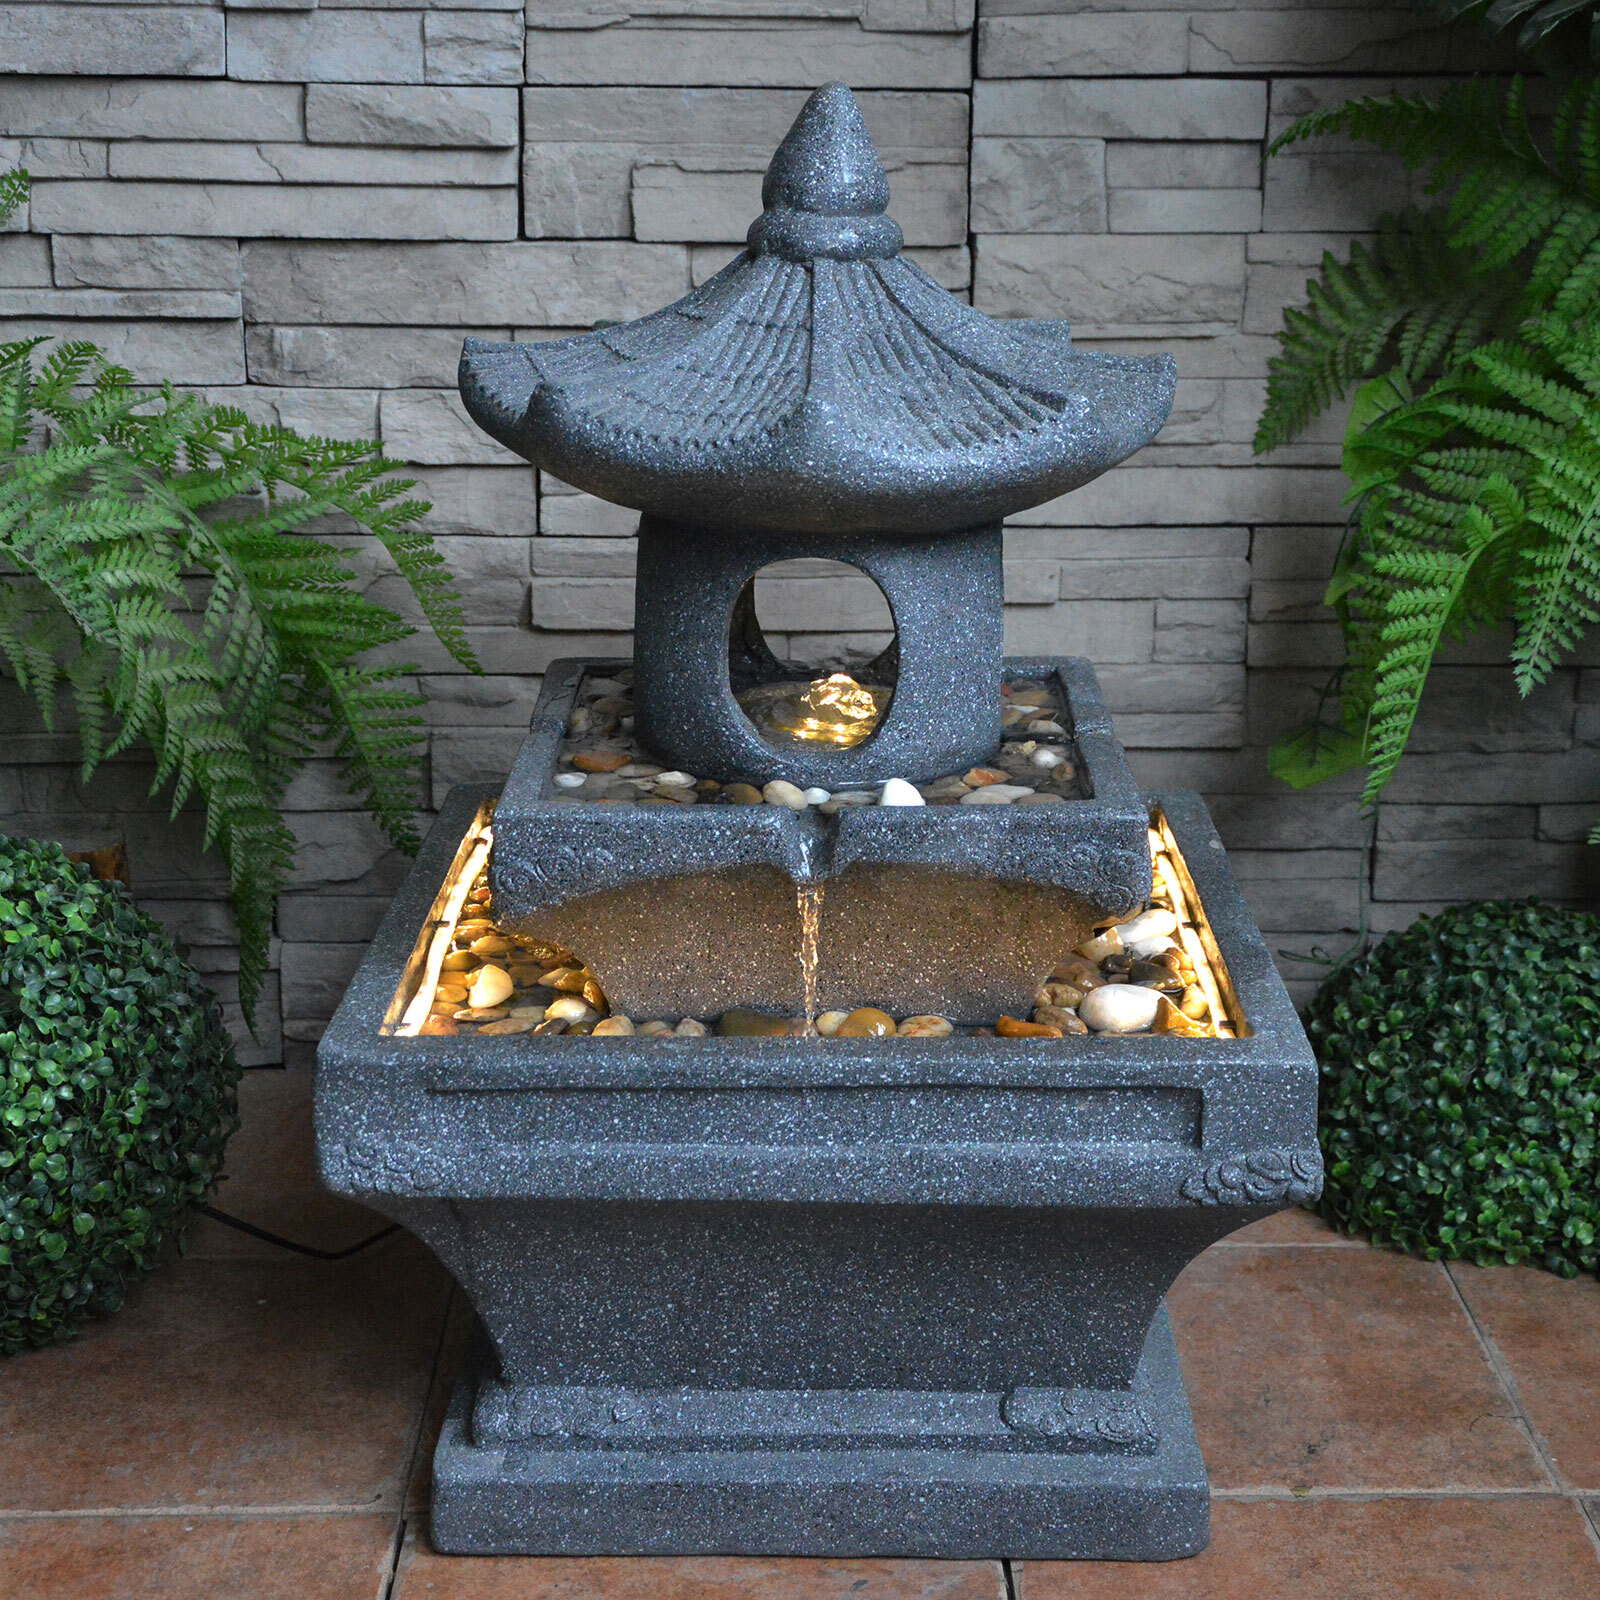 69cm Japanese Style Pagoda Garden Lantern Water Feature Fountain With Led Lights